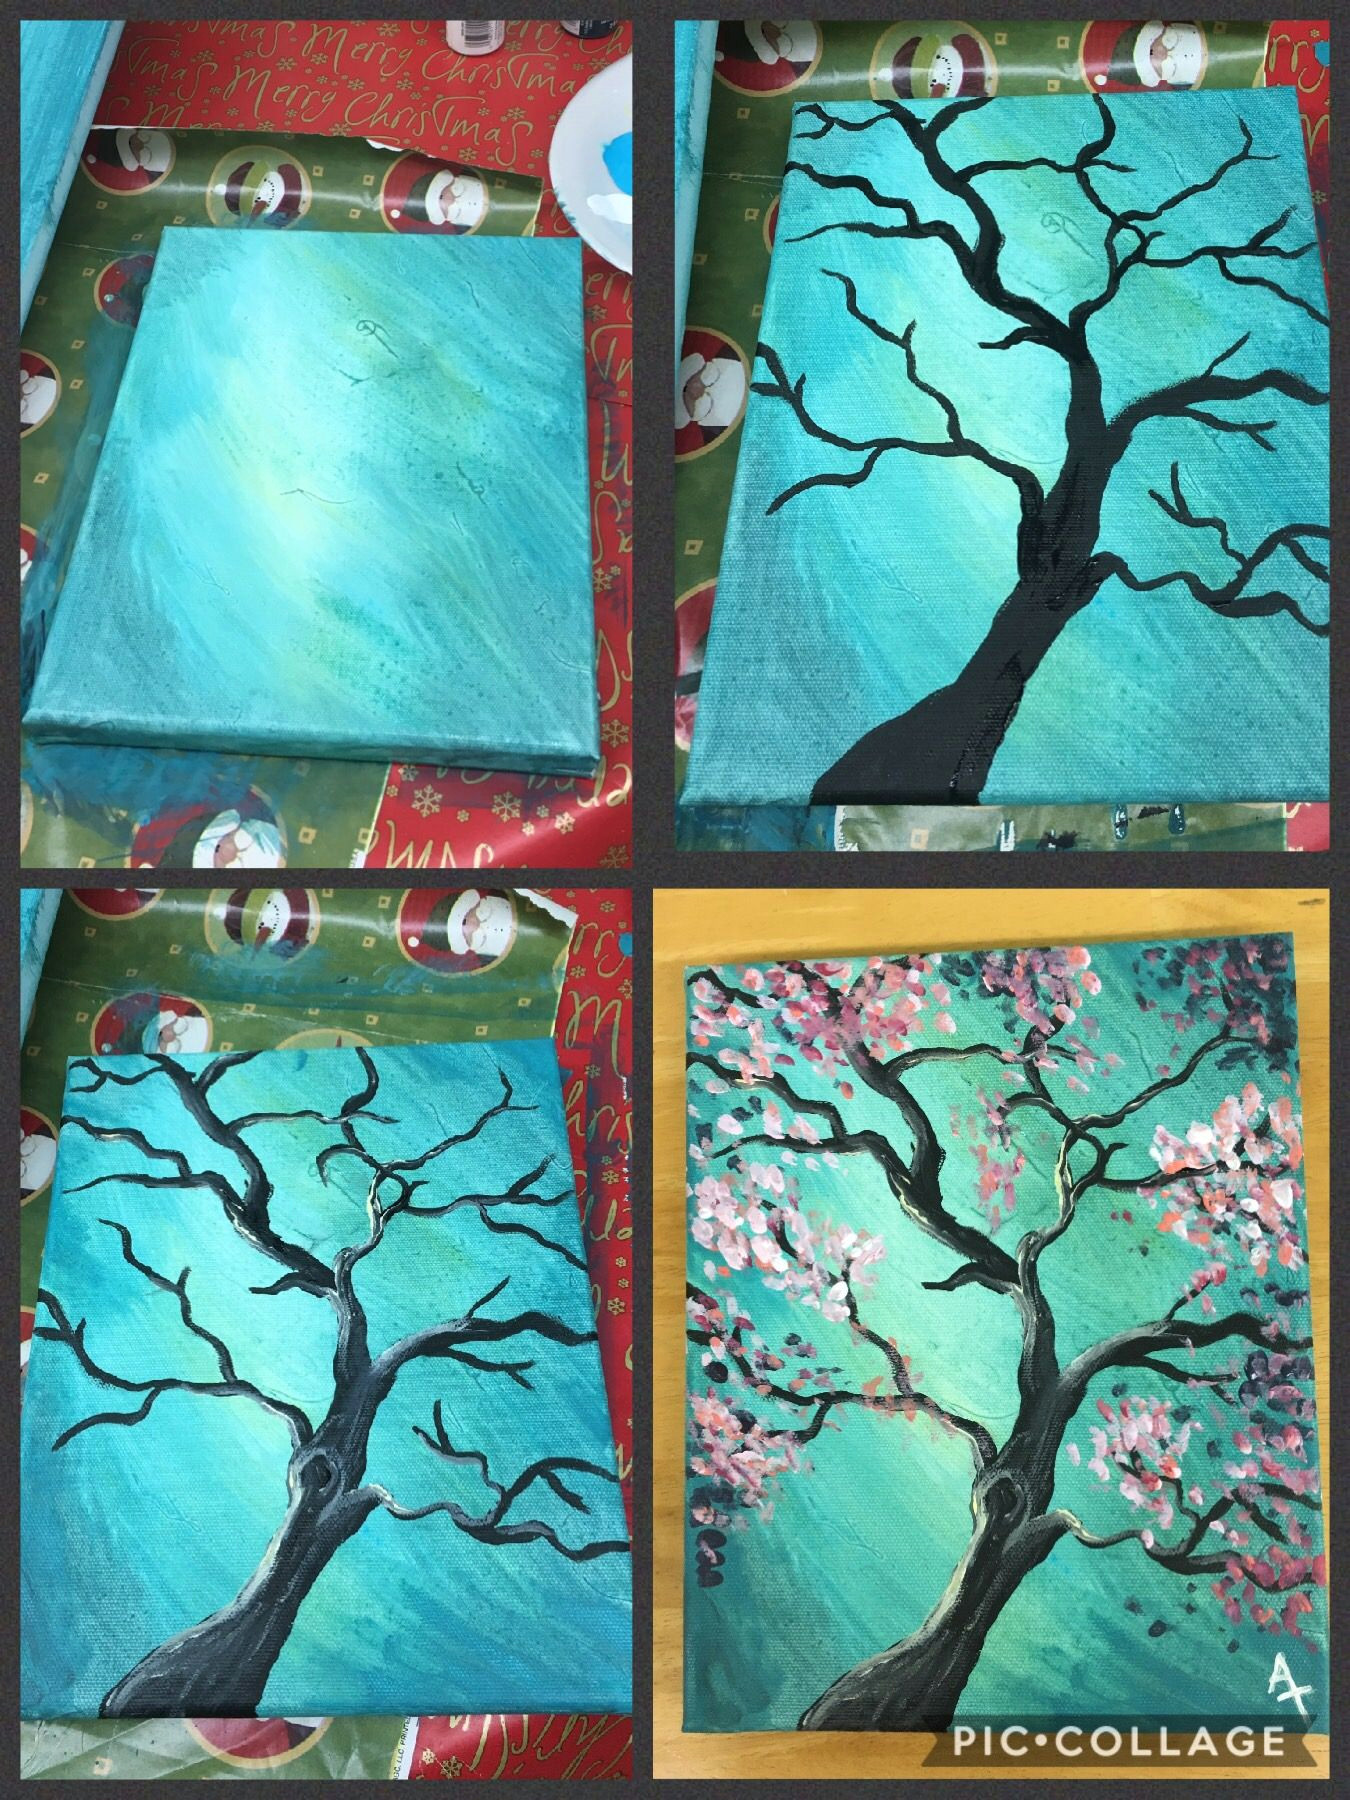 Easy Landscape Drawings In Colour Step by Step Pink Flowering Tree Painting with Pretty Teal Blue